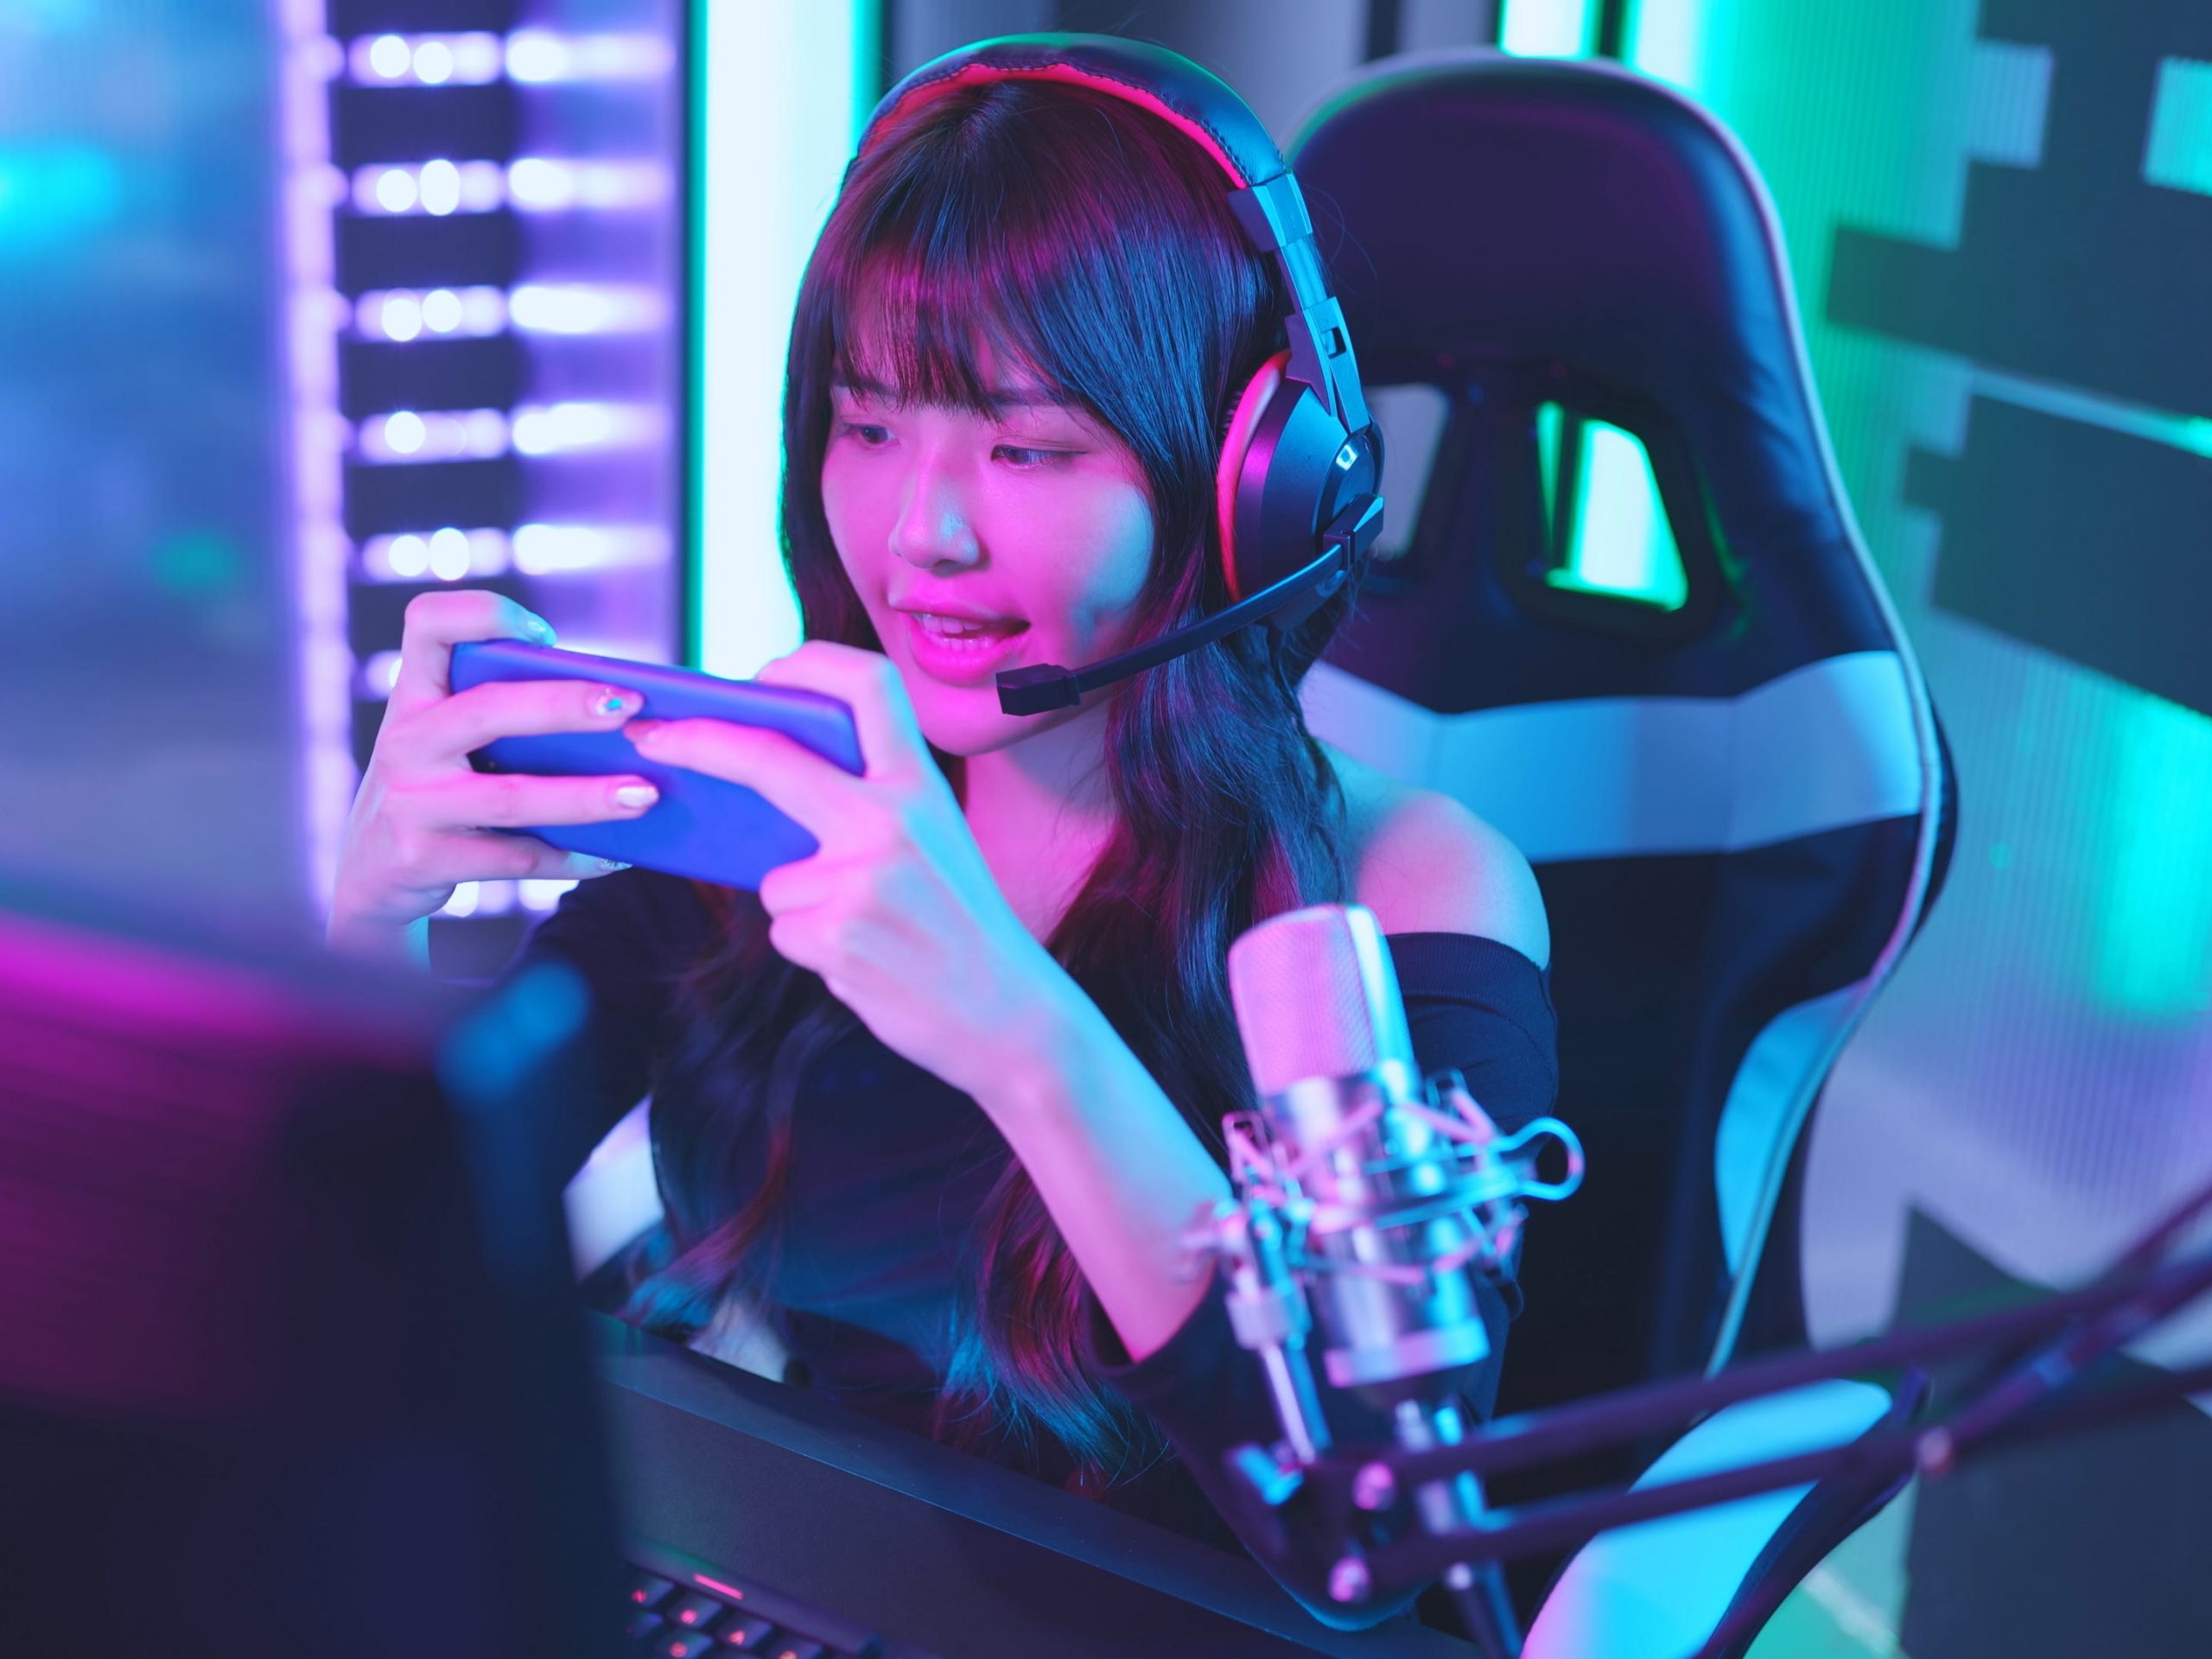 Woman on phone with Bluetooth headphones during a gaming livestream.